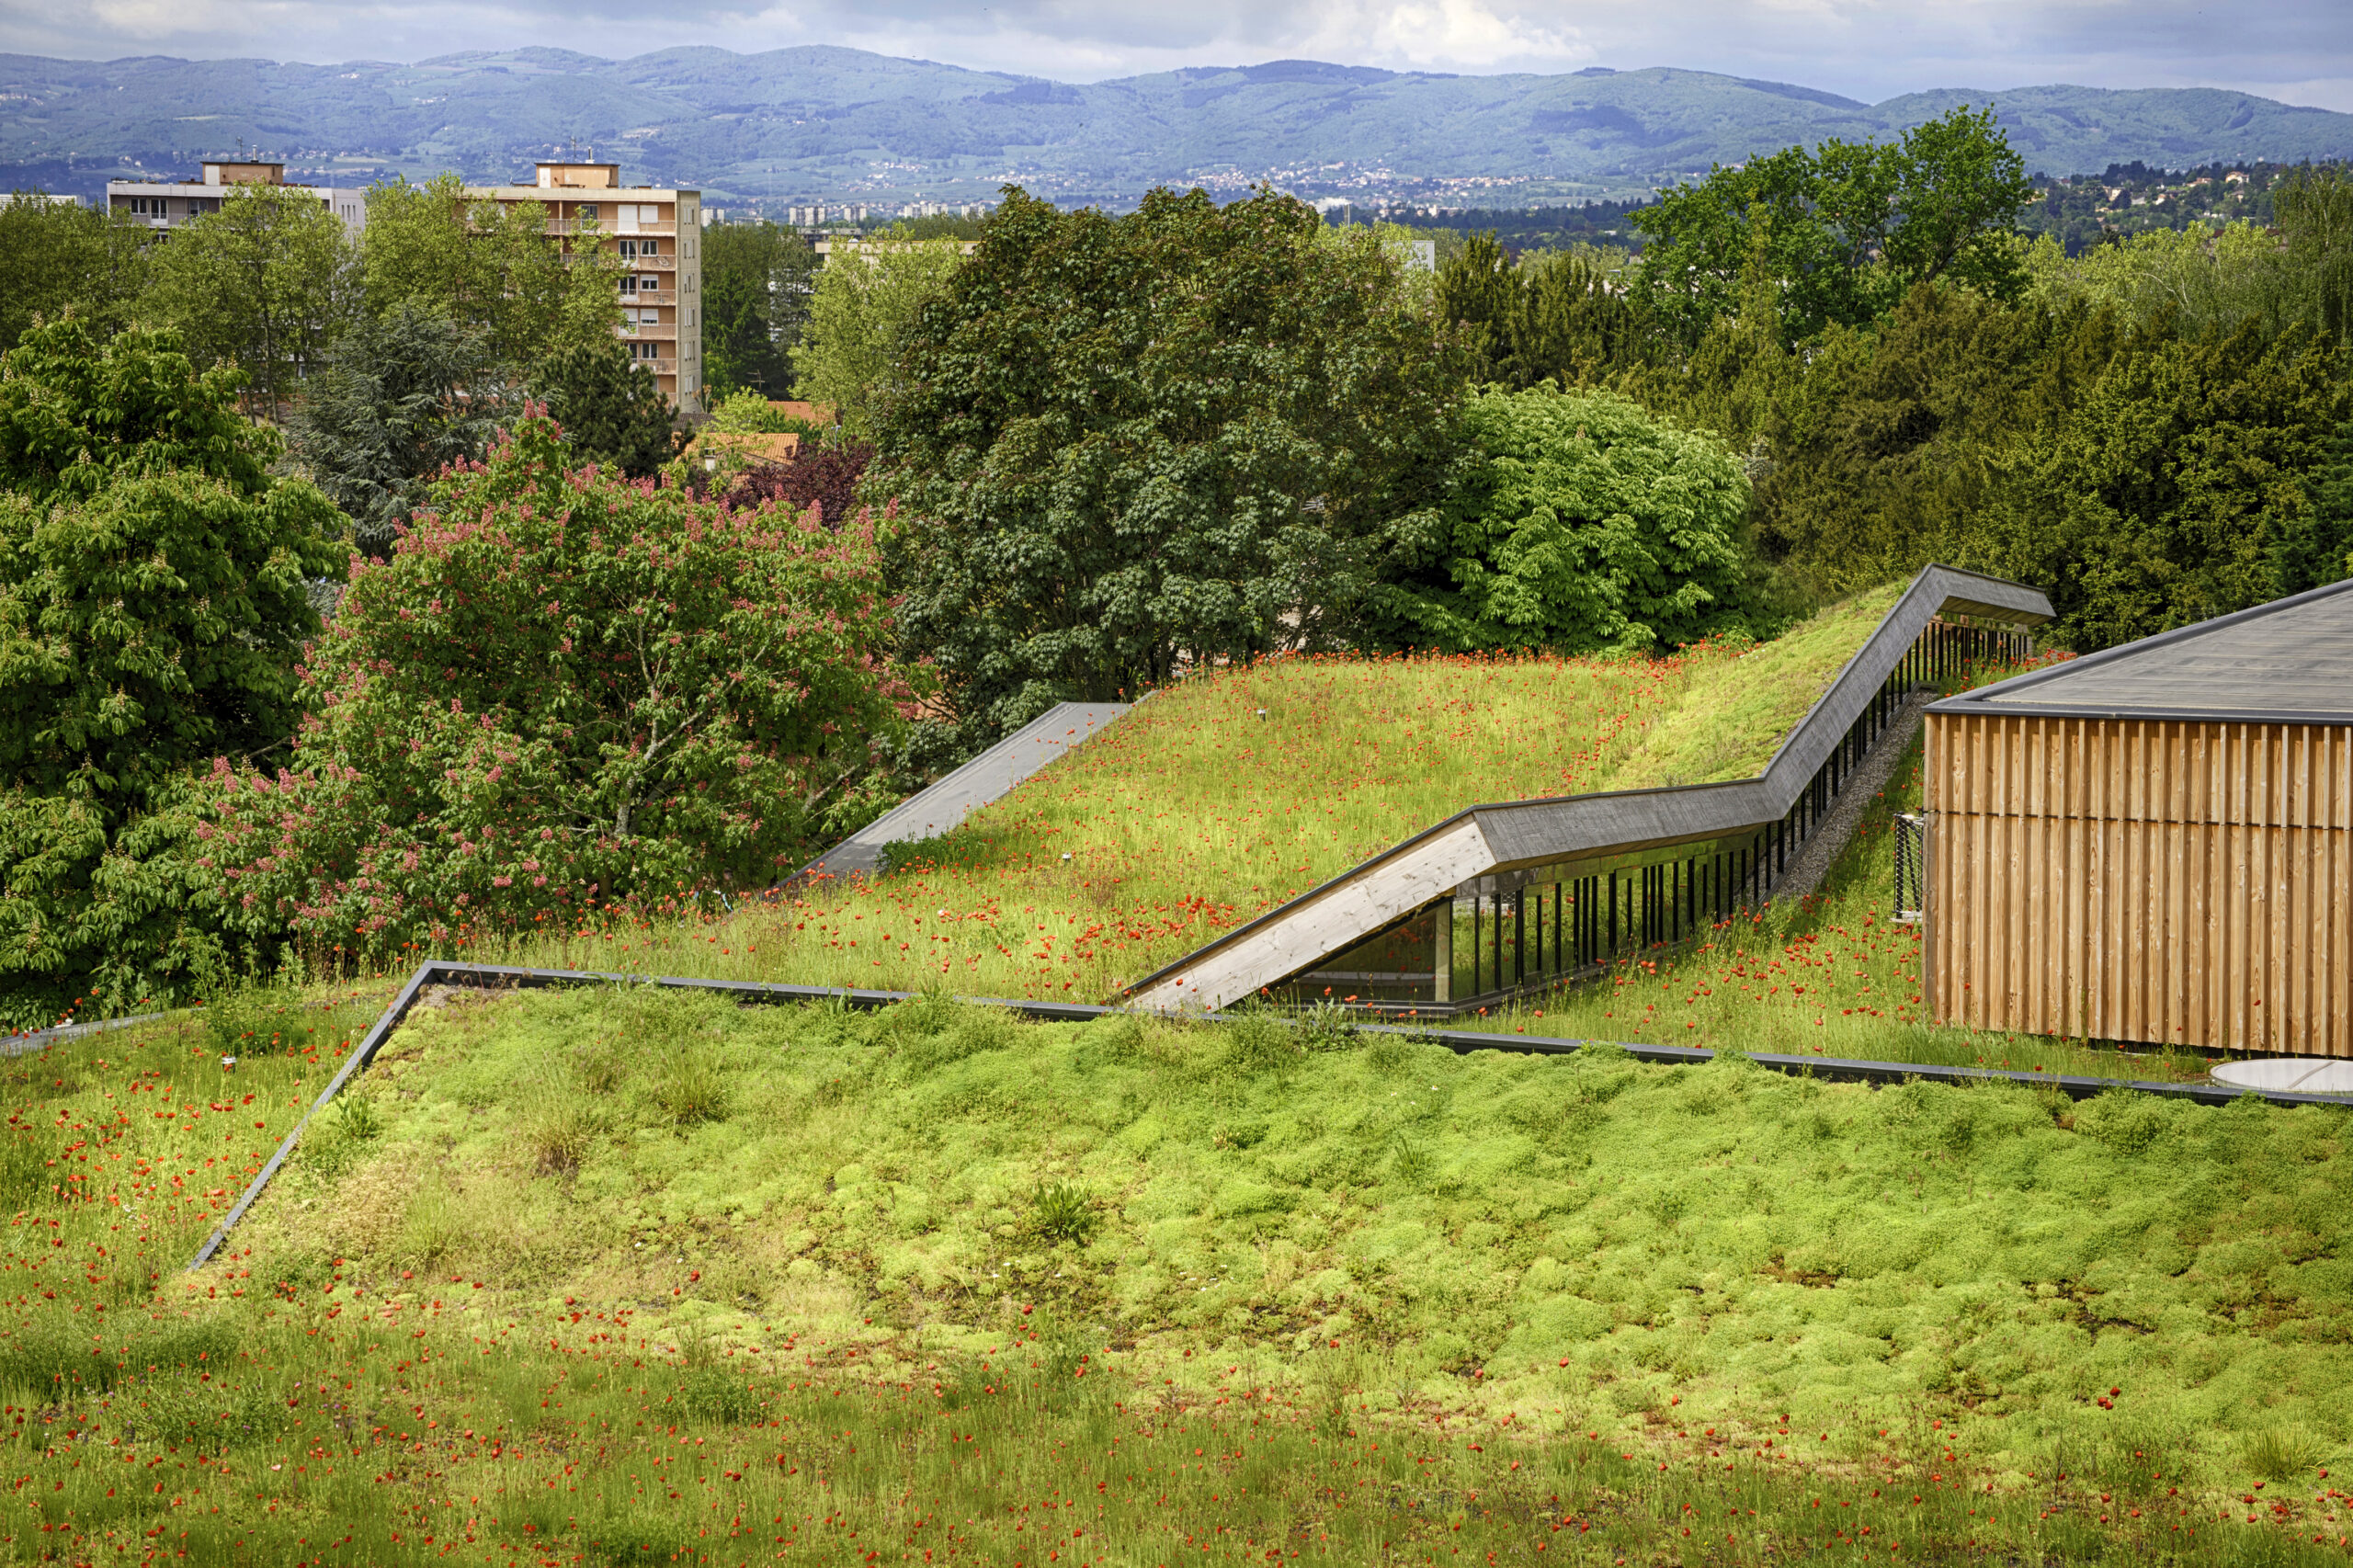 An exterior view of the school blending into the surrounding greenery and topography.